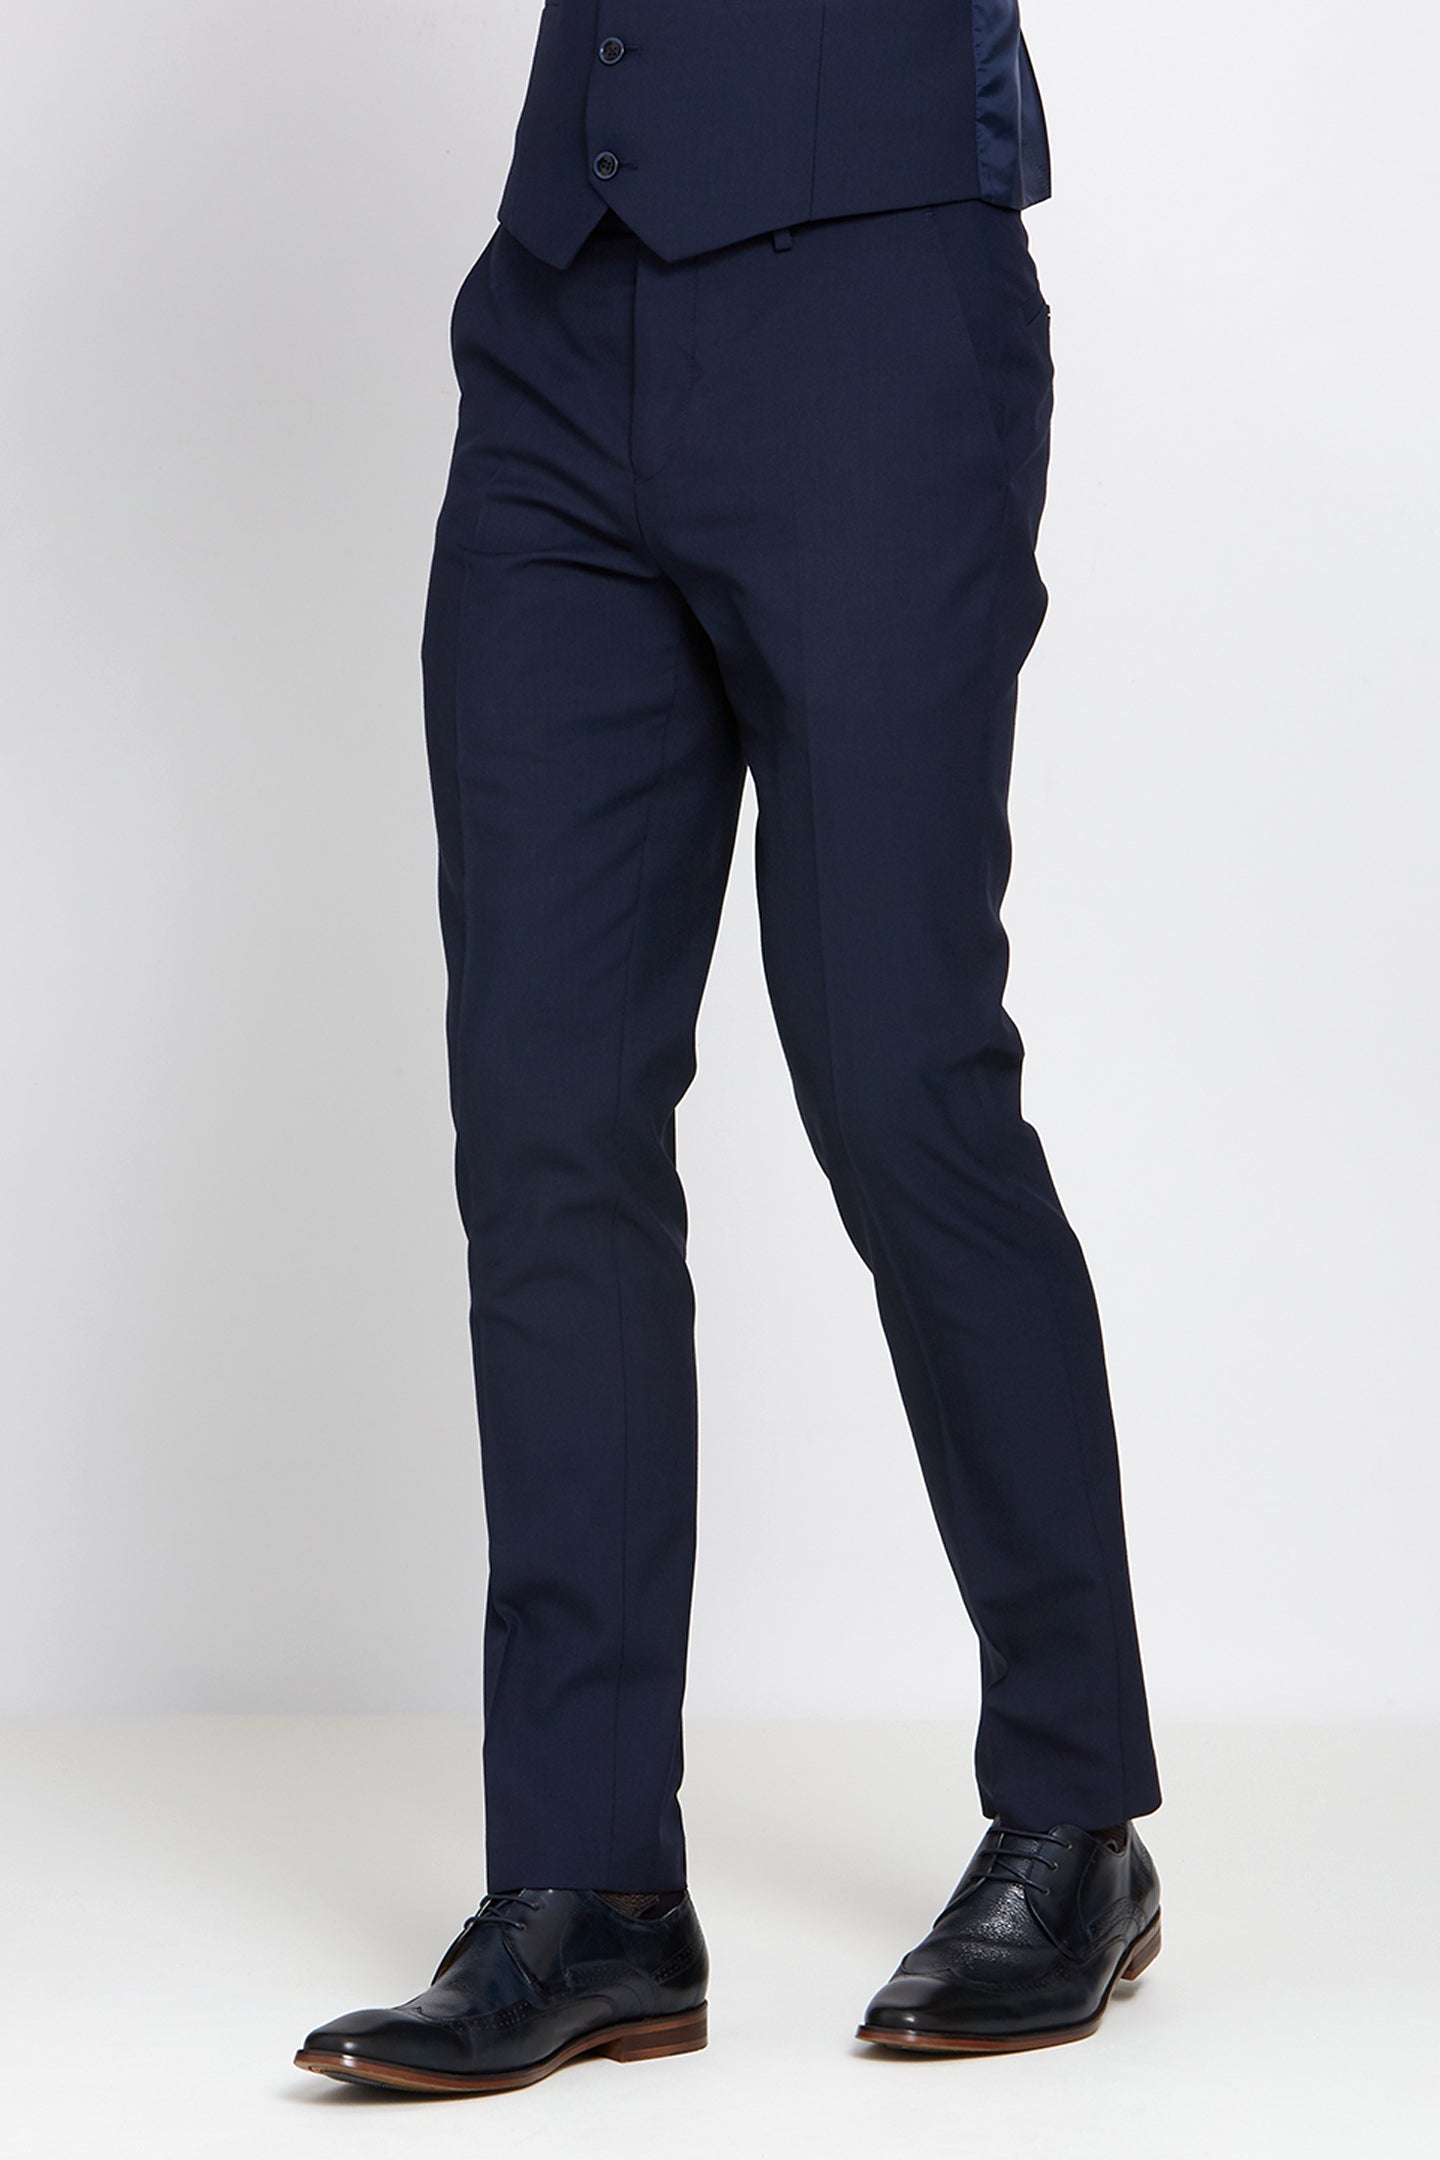 James Navy Trousers Comfort Fit by Benetti